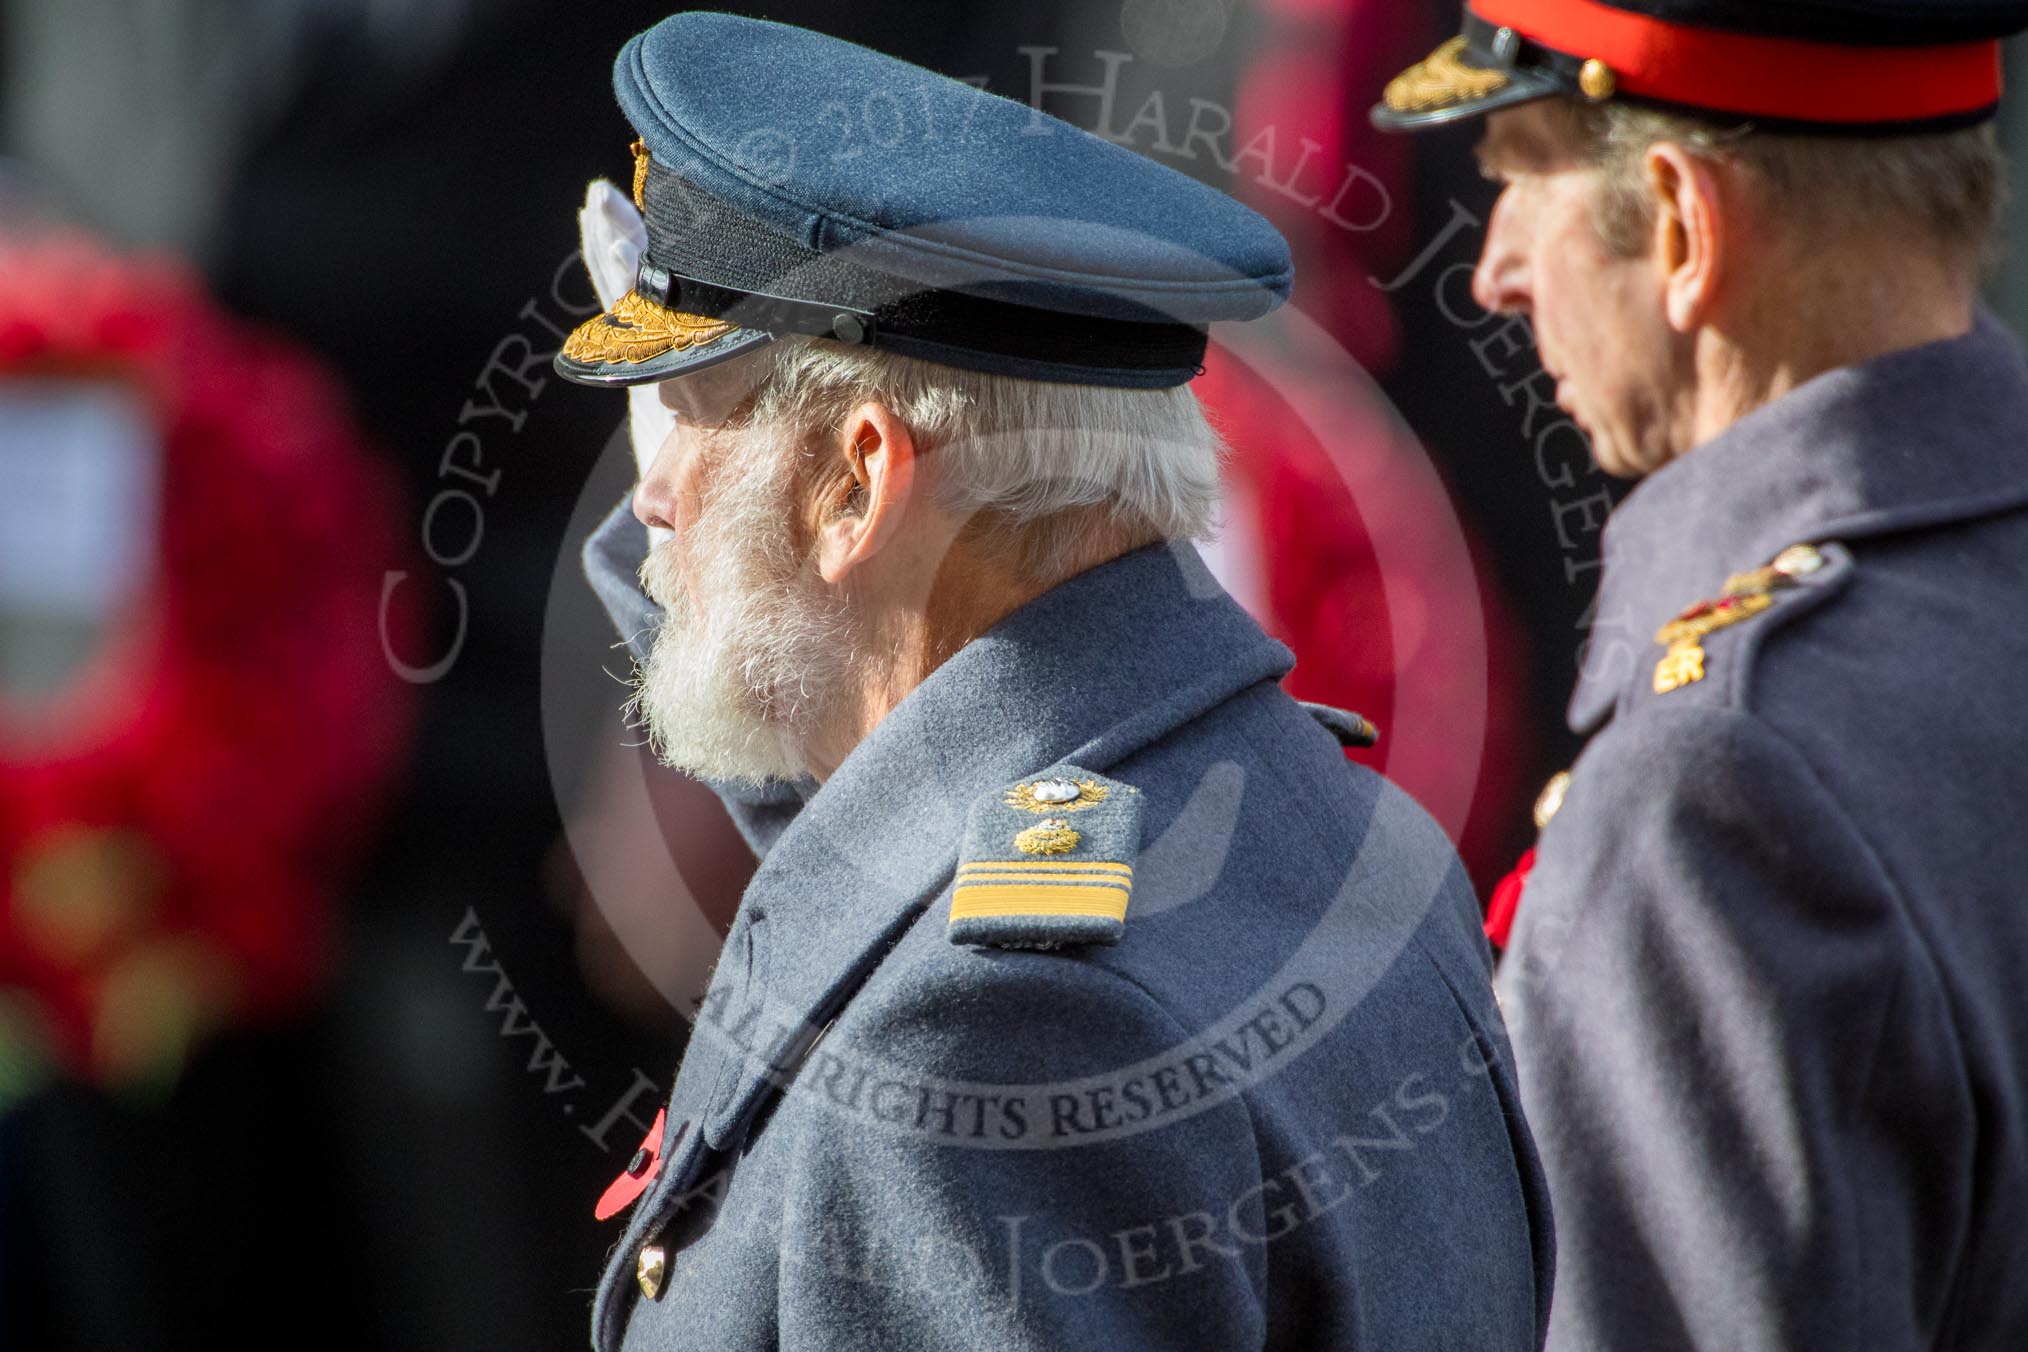 HRH Prince Michael of Kent and HRH The Duke of Kent (Prince Edward) saluting at the Cenotaph during the Remembrance Sunday Cenotaph Ceremony 2018 at Horse Guards Parade, Westminster, London, 11 November 2018, 11:07.